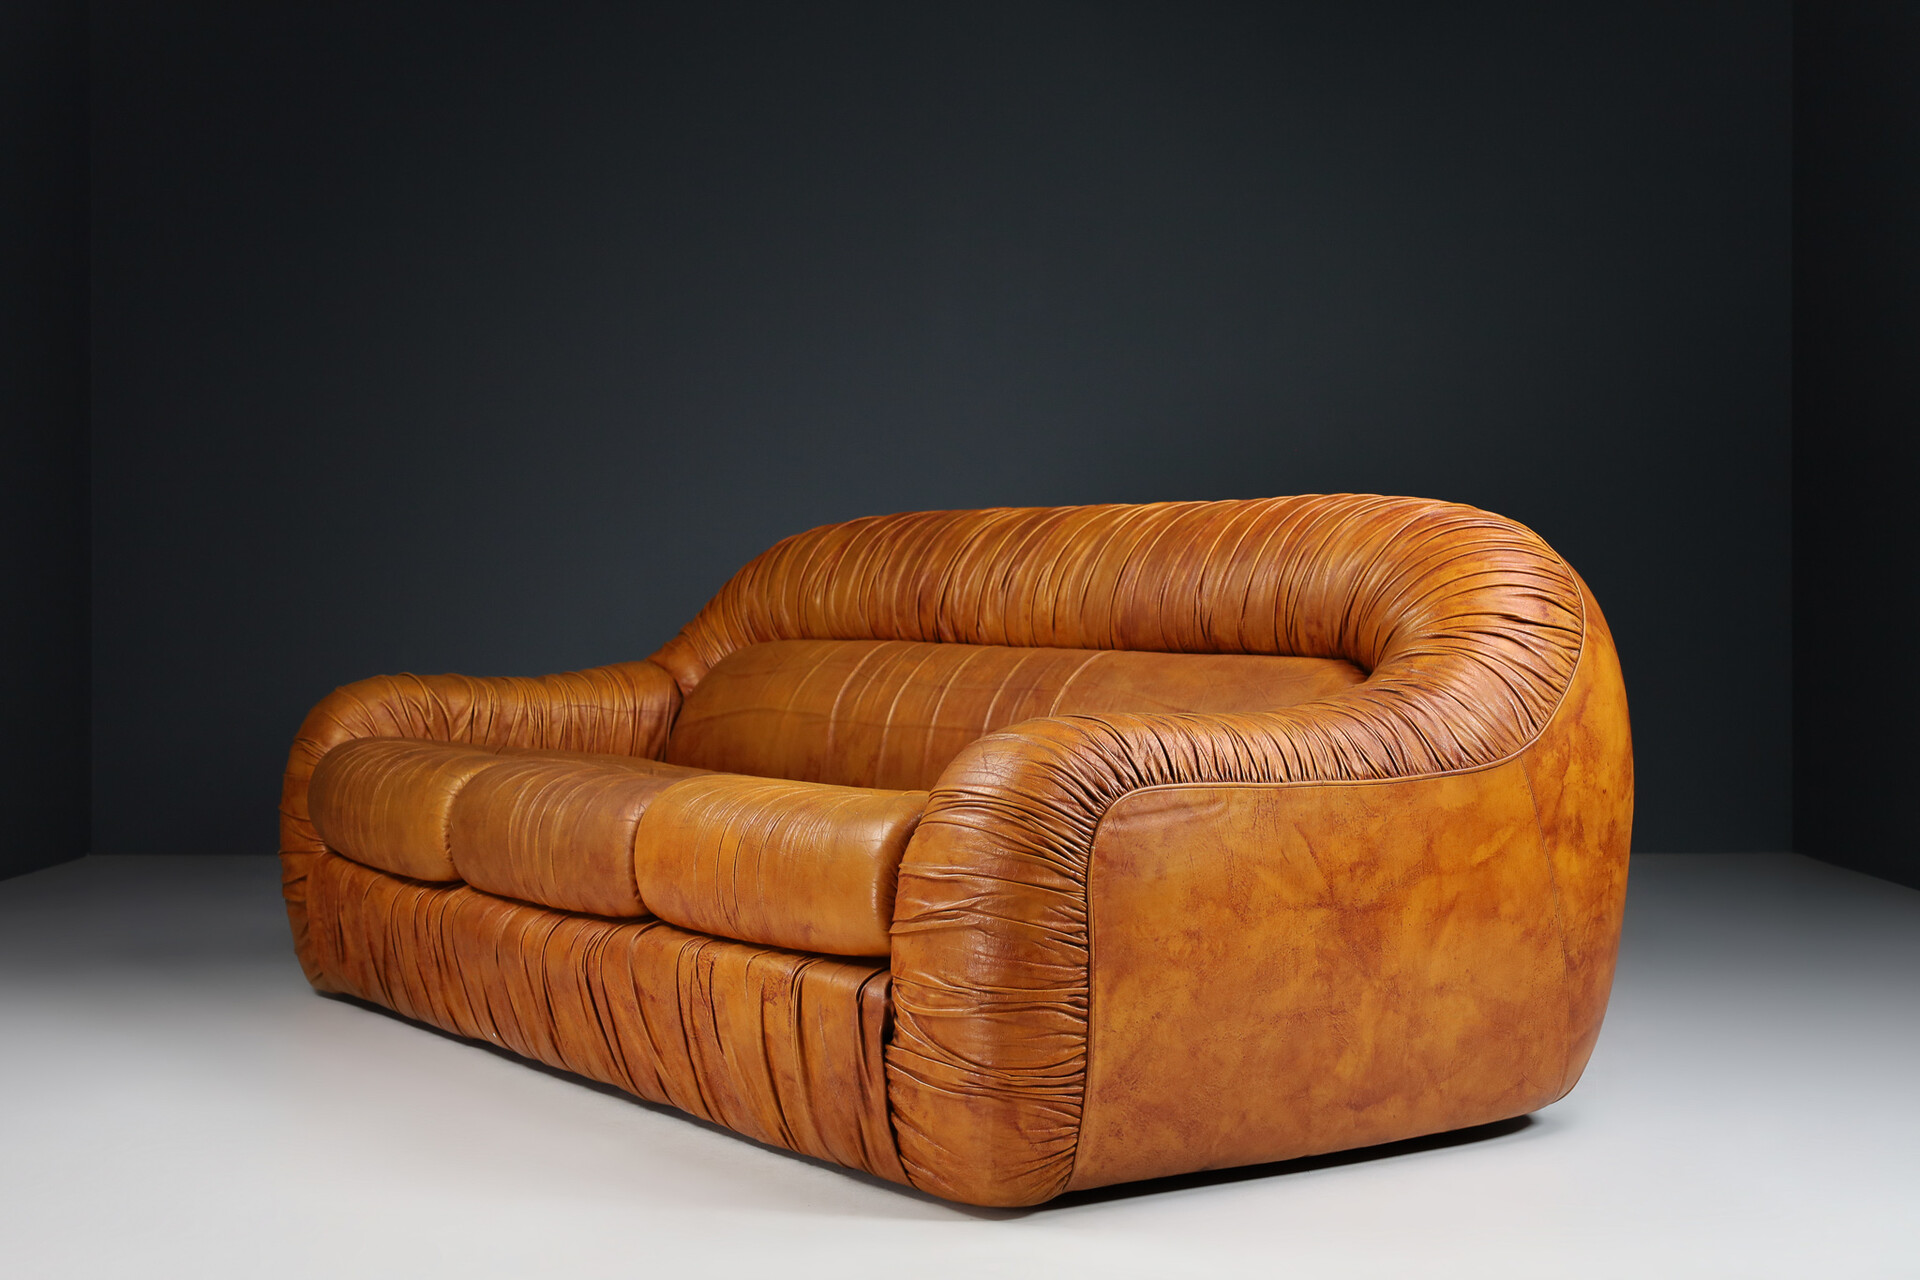 Mid century modern Lounge sofa 1970s Seating Italy Davidowski leather, by original George Eurosalotto, \'Capriccio\' Bighinello Benches - designed model century Sofas brown for - and Late-20th in 